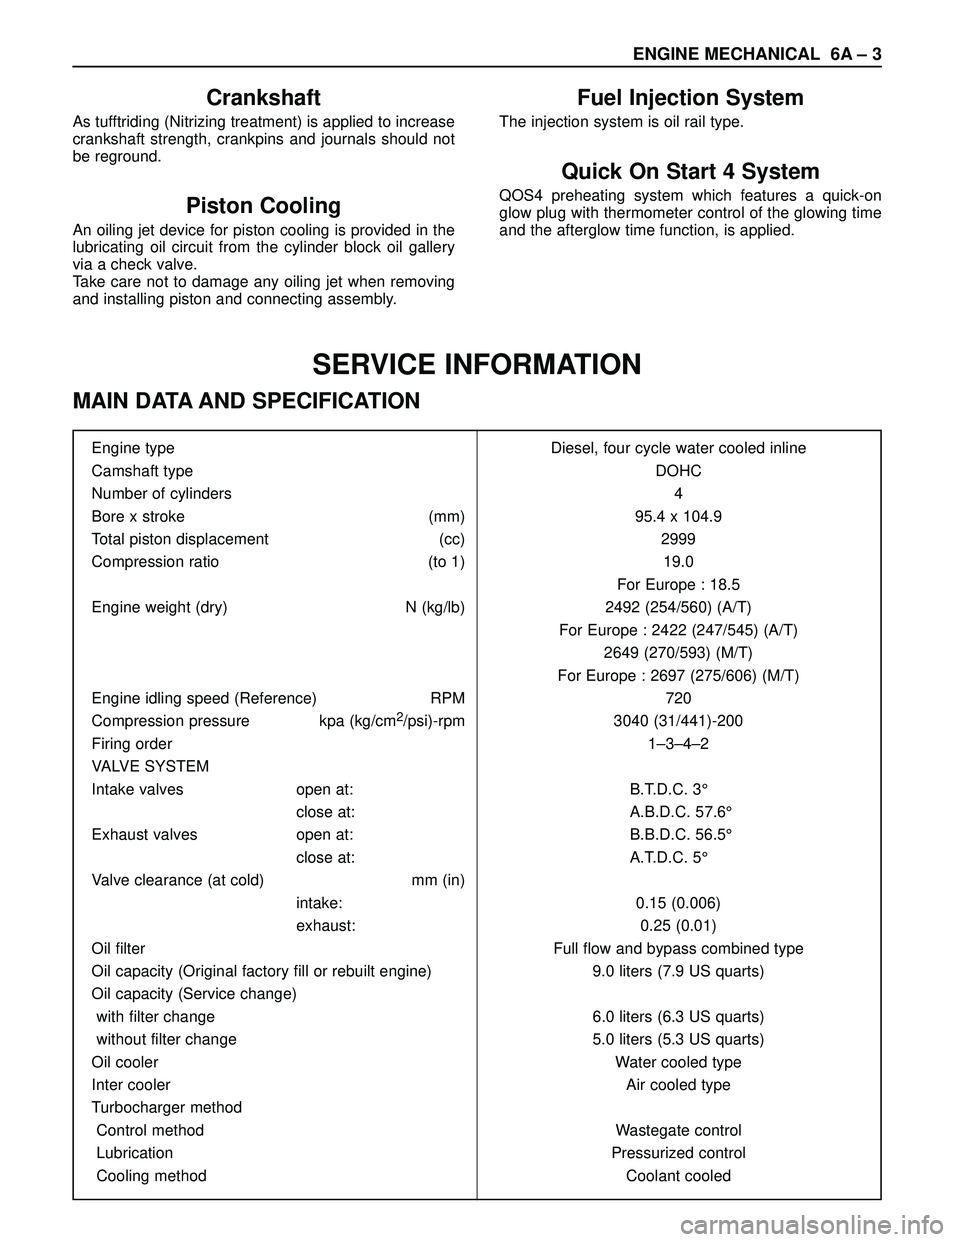 ISUZU TROOPER 1998  Service Repair Manual ENGINE MECHANICAL 6A – 3
SERVICE INFORMATION
MAIN DATA AND SPECIFICATION
Engine type Diesel, four cycle water cooled inline
Camshaft type DOHC
Number of cylinders 4
Bore x stroke (mm) 95.4 x 104.9
T